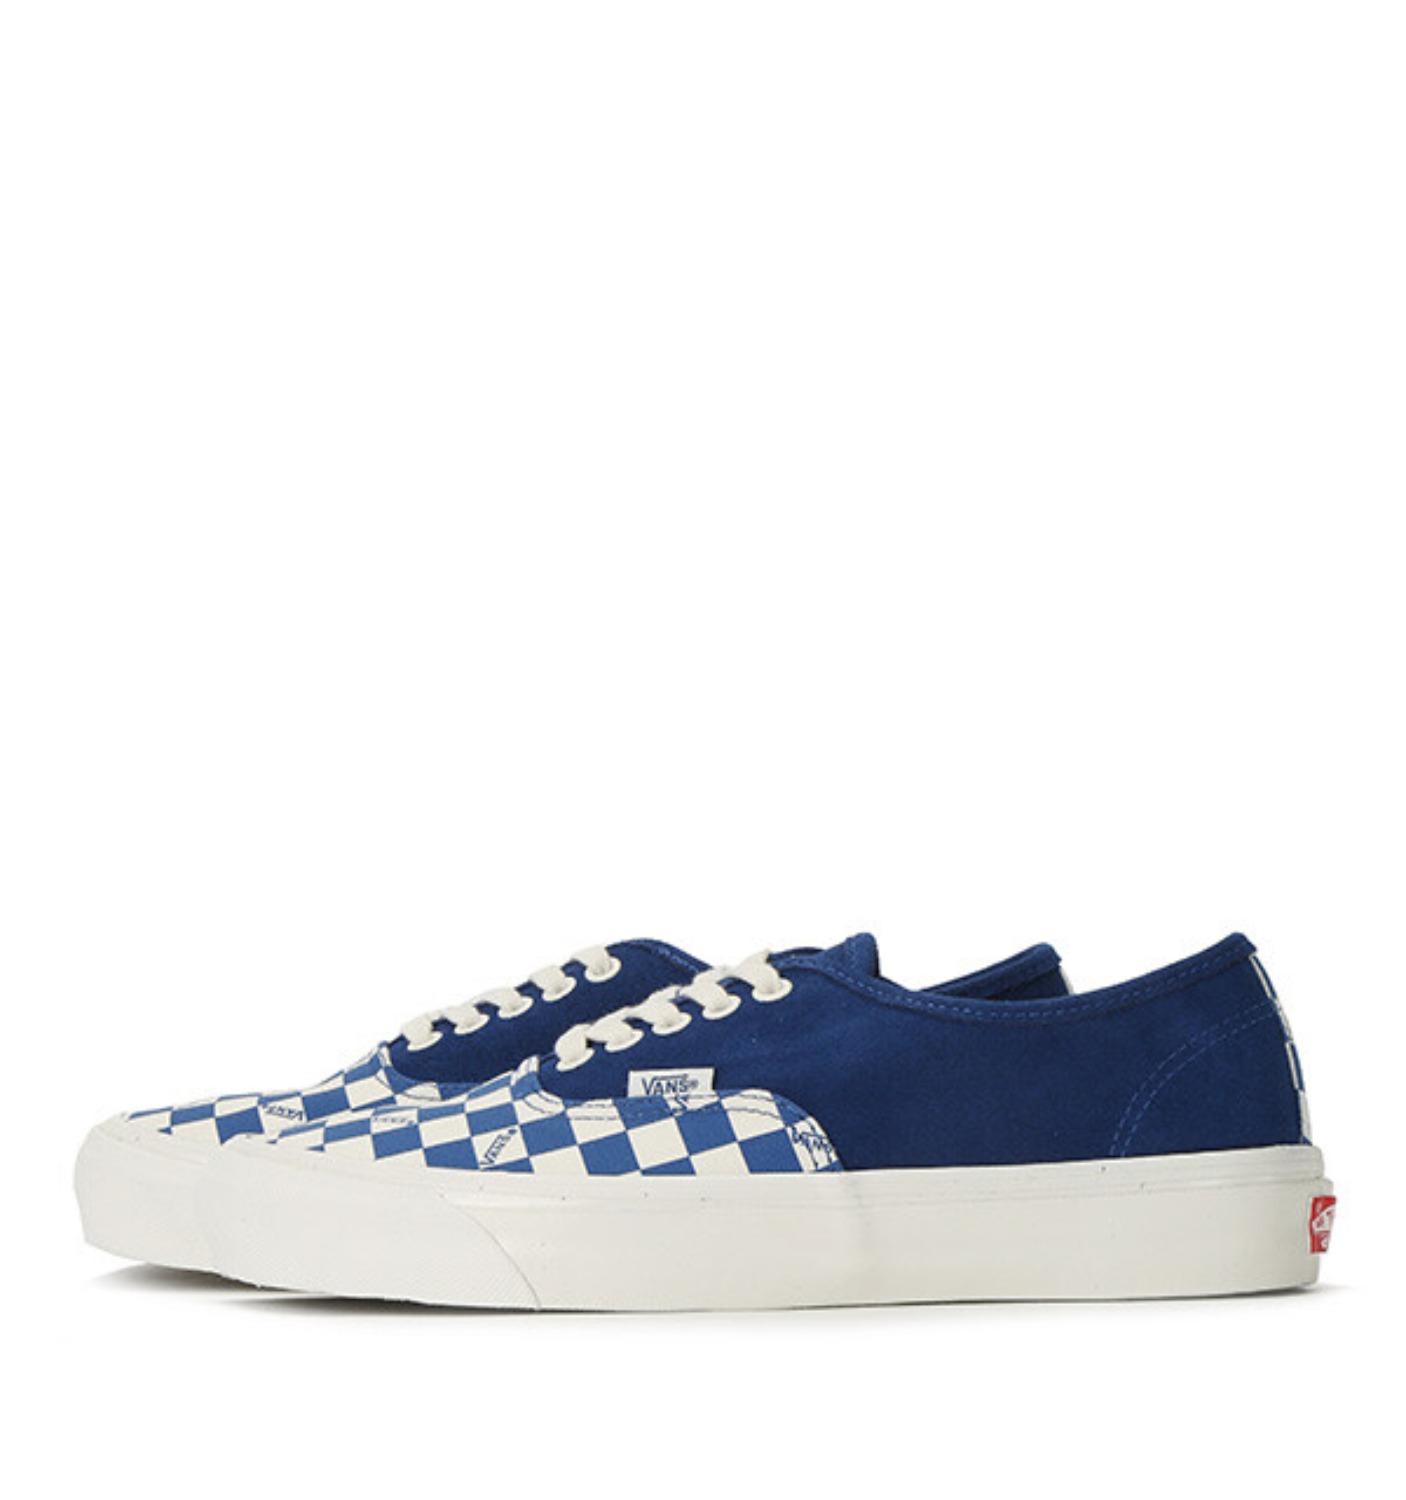 OG AUTHENTIC LX(SUEDE/CANVAS) TRUE BLUE/CHECKERBOARD